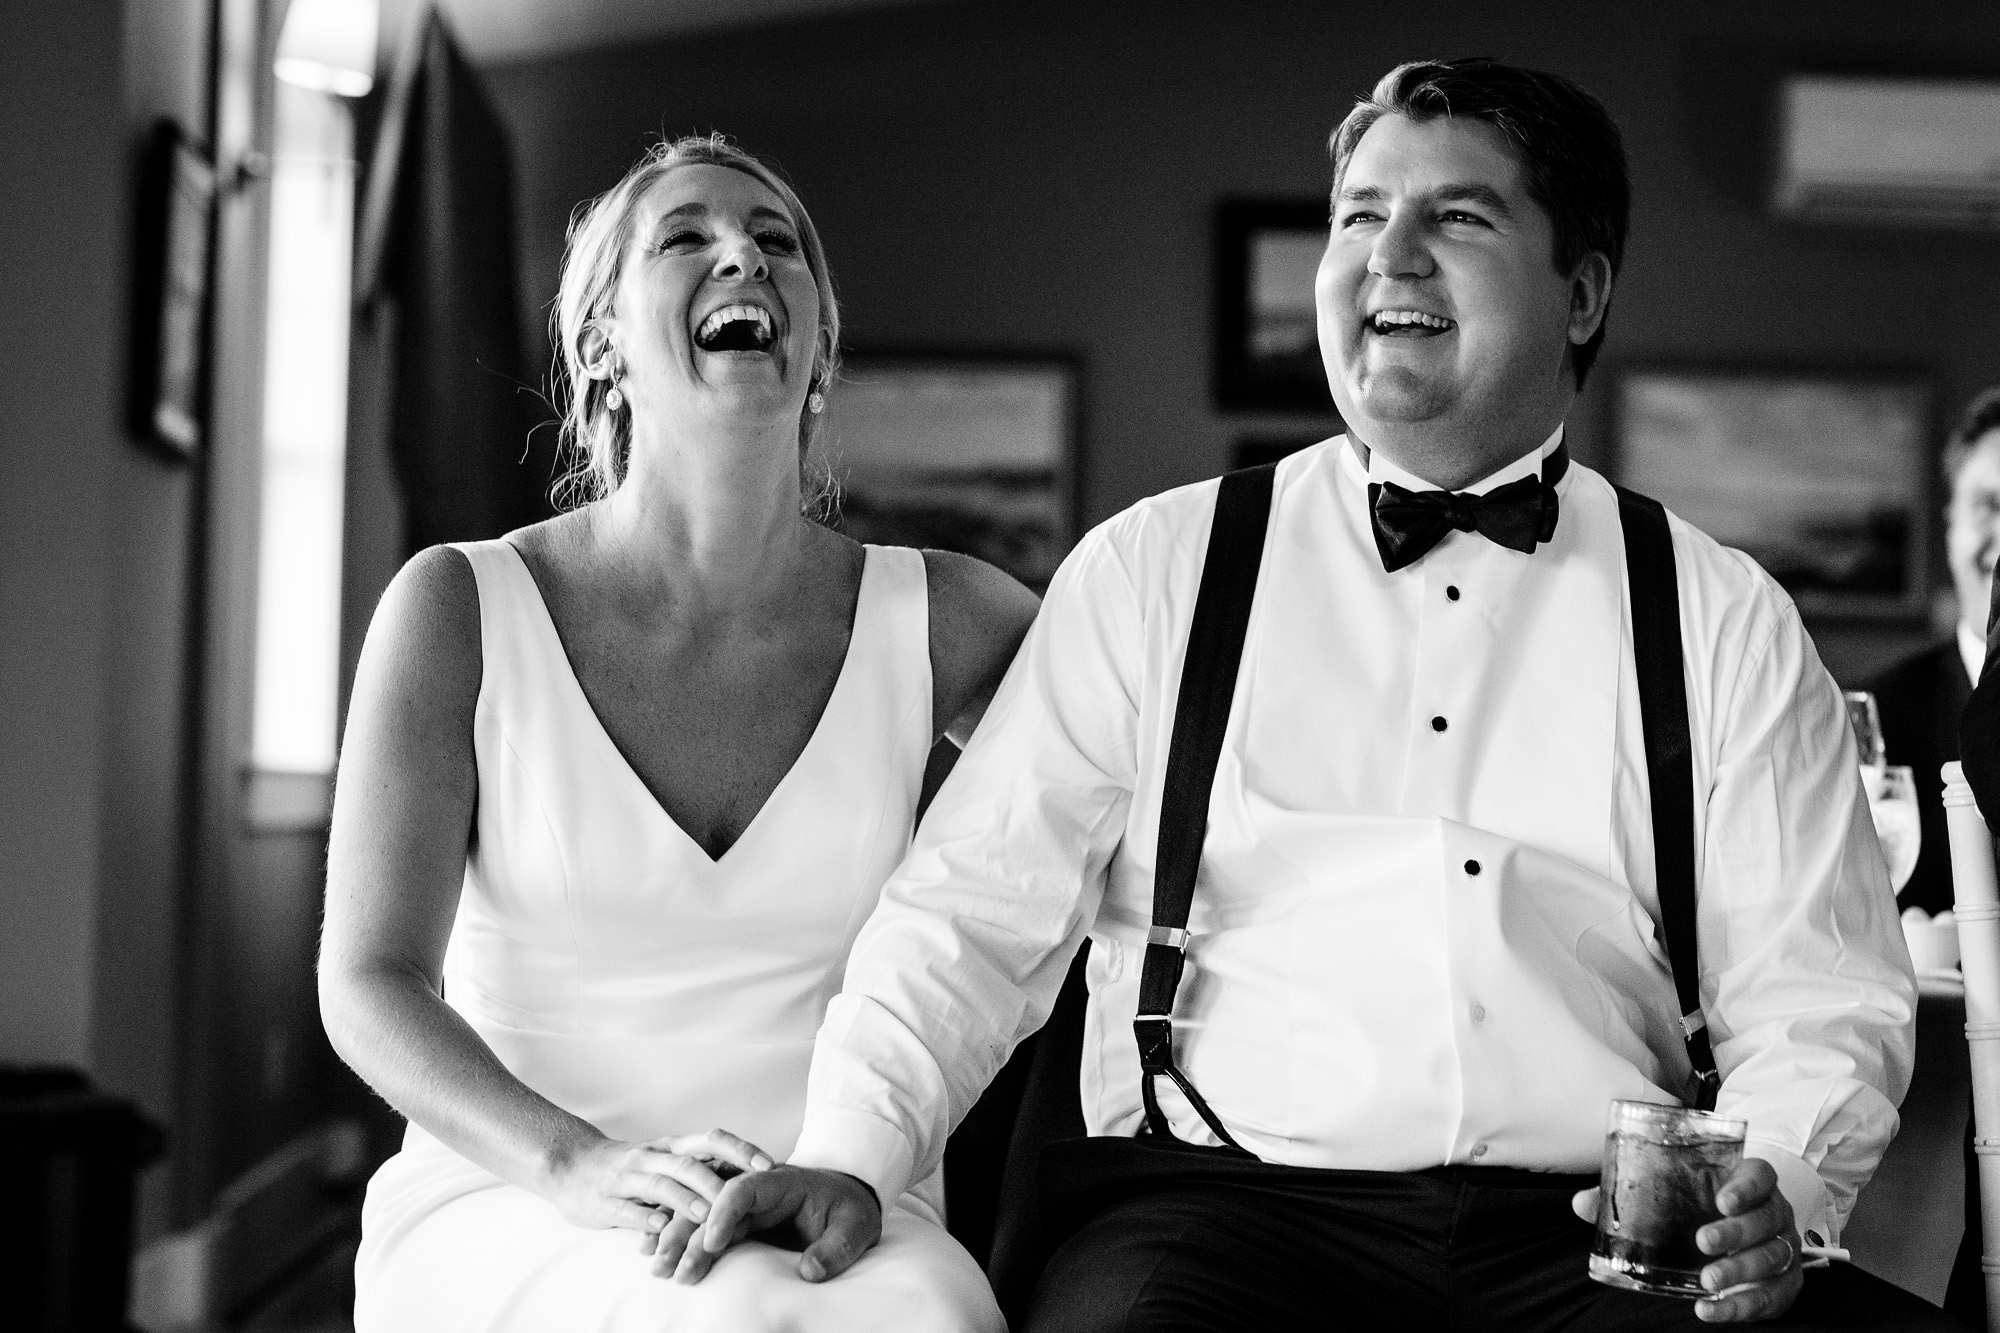 The bride and groom laugh at their Newagen Seaside Inn wedding